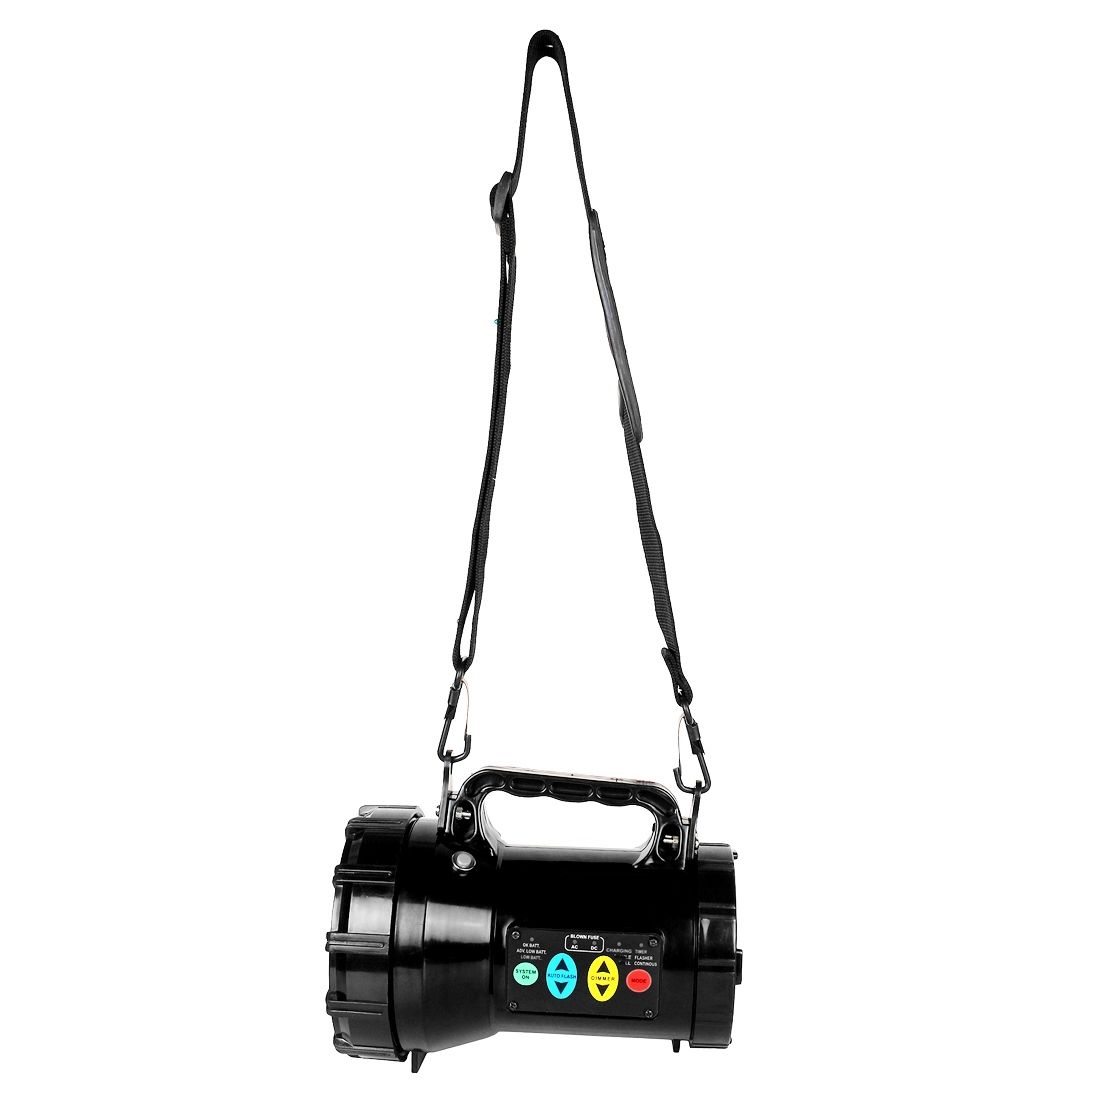 FOS Army Halogen Search Light 55W with Control Panel (Range up to 1 Kilometer)